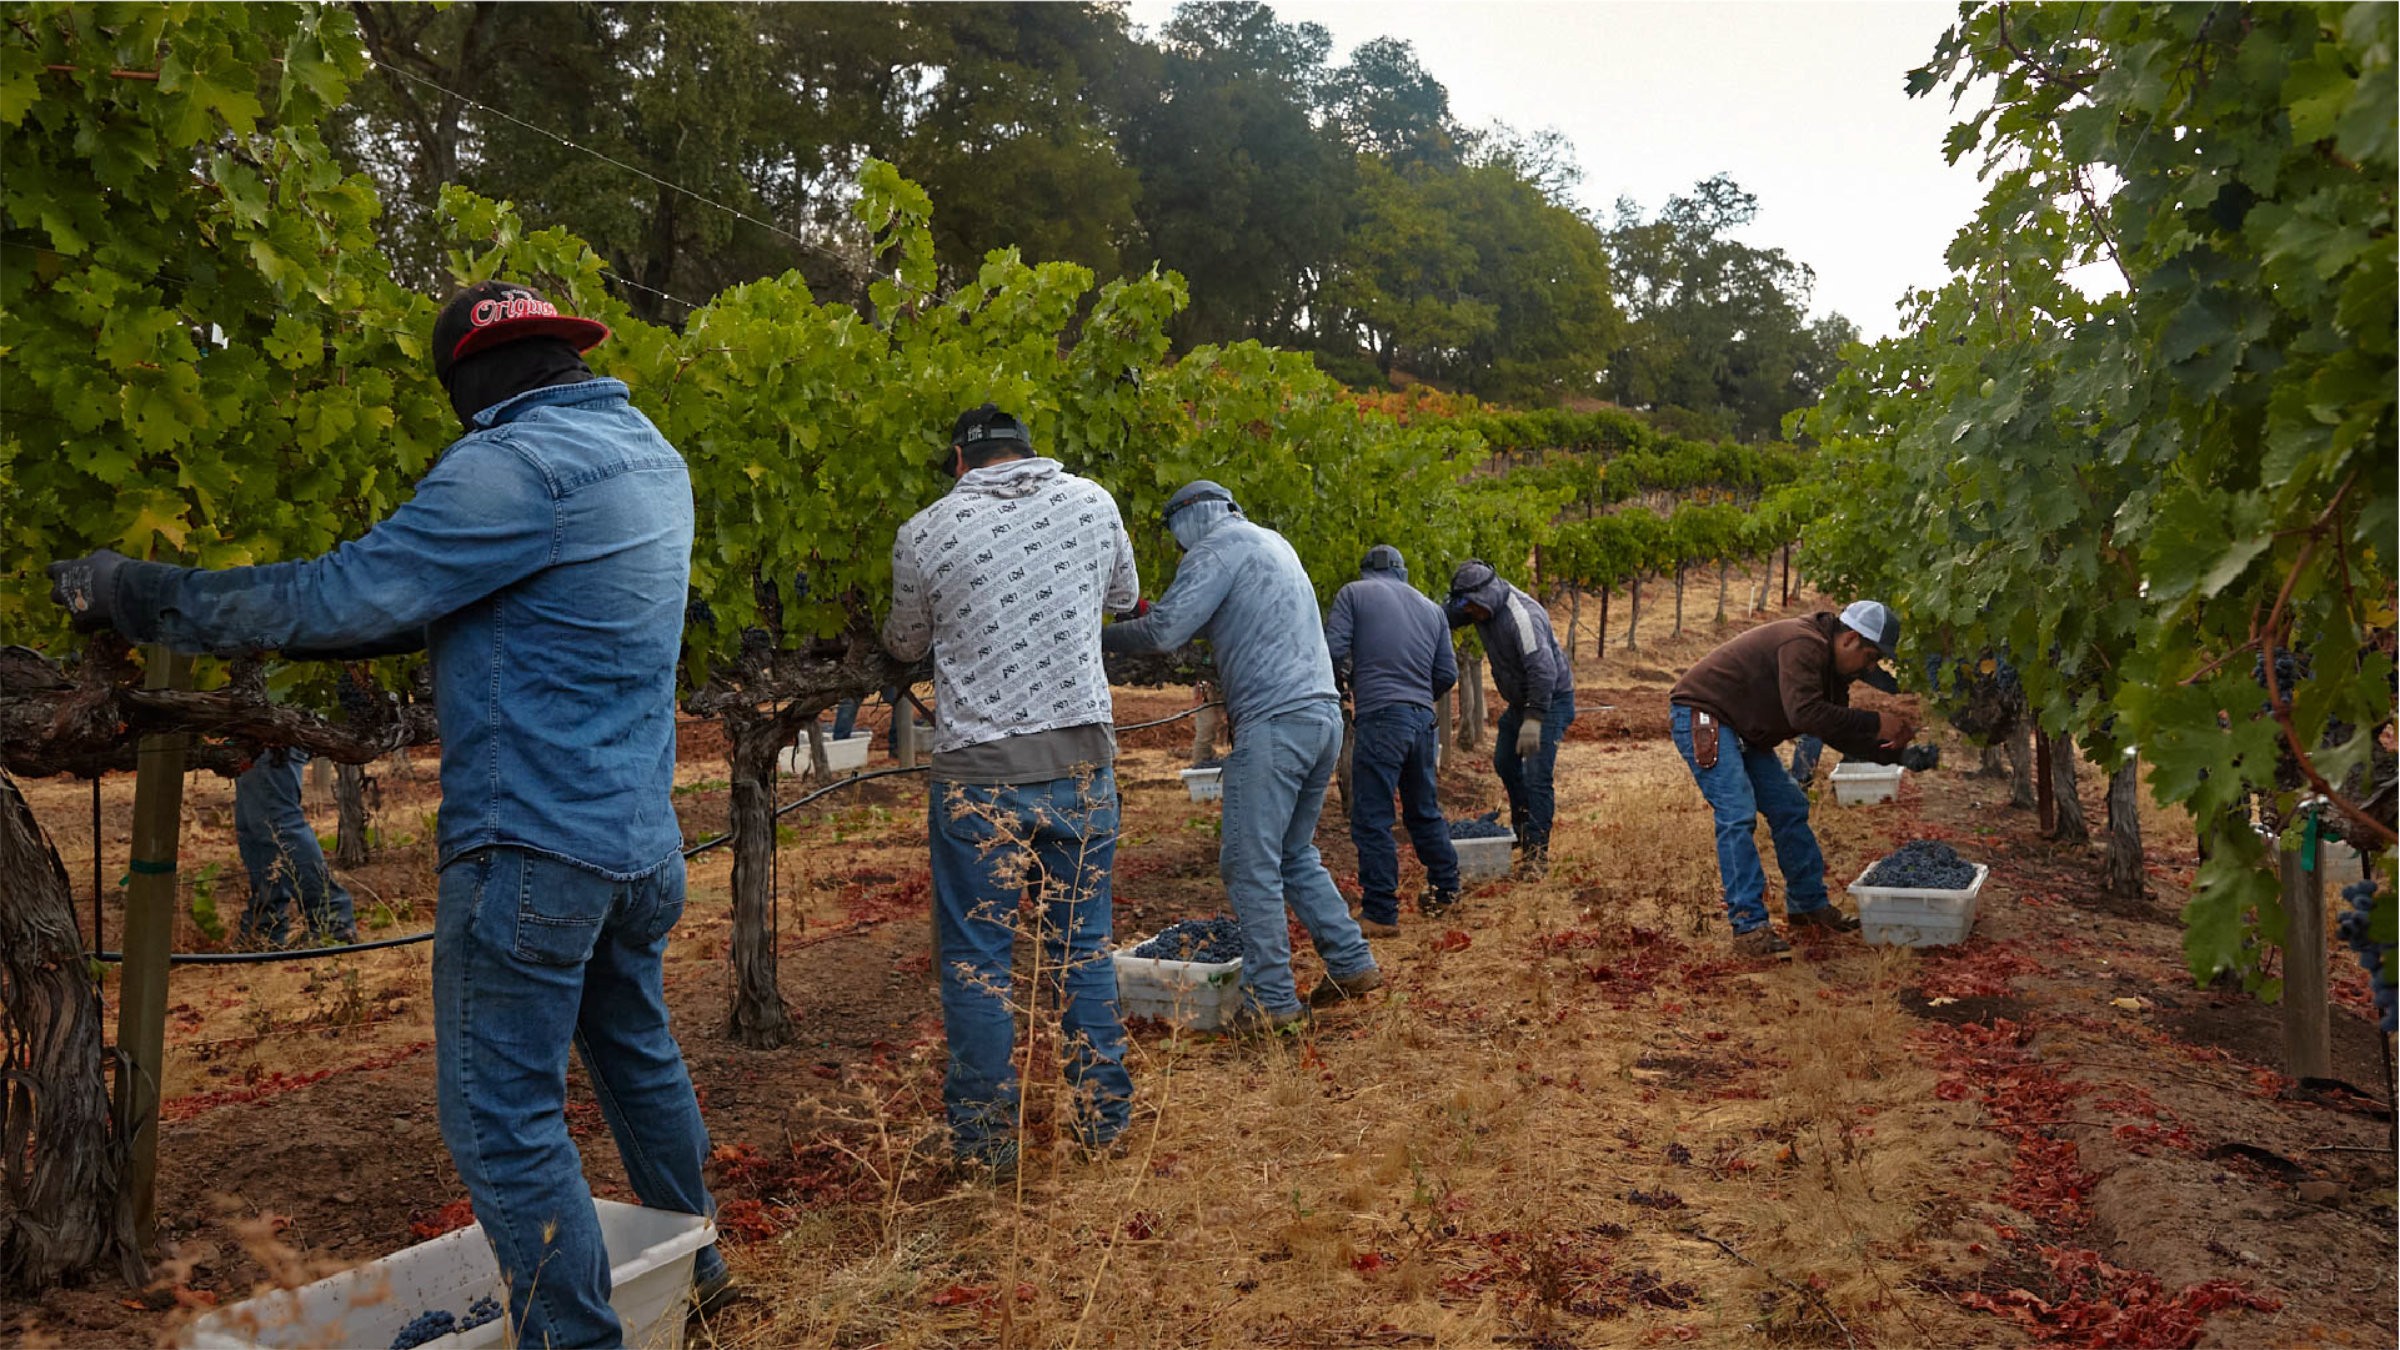 Workers harvesting grapes